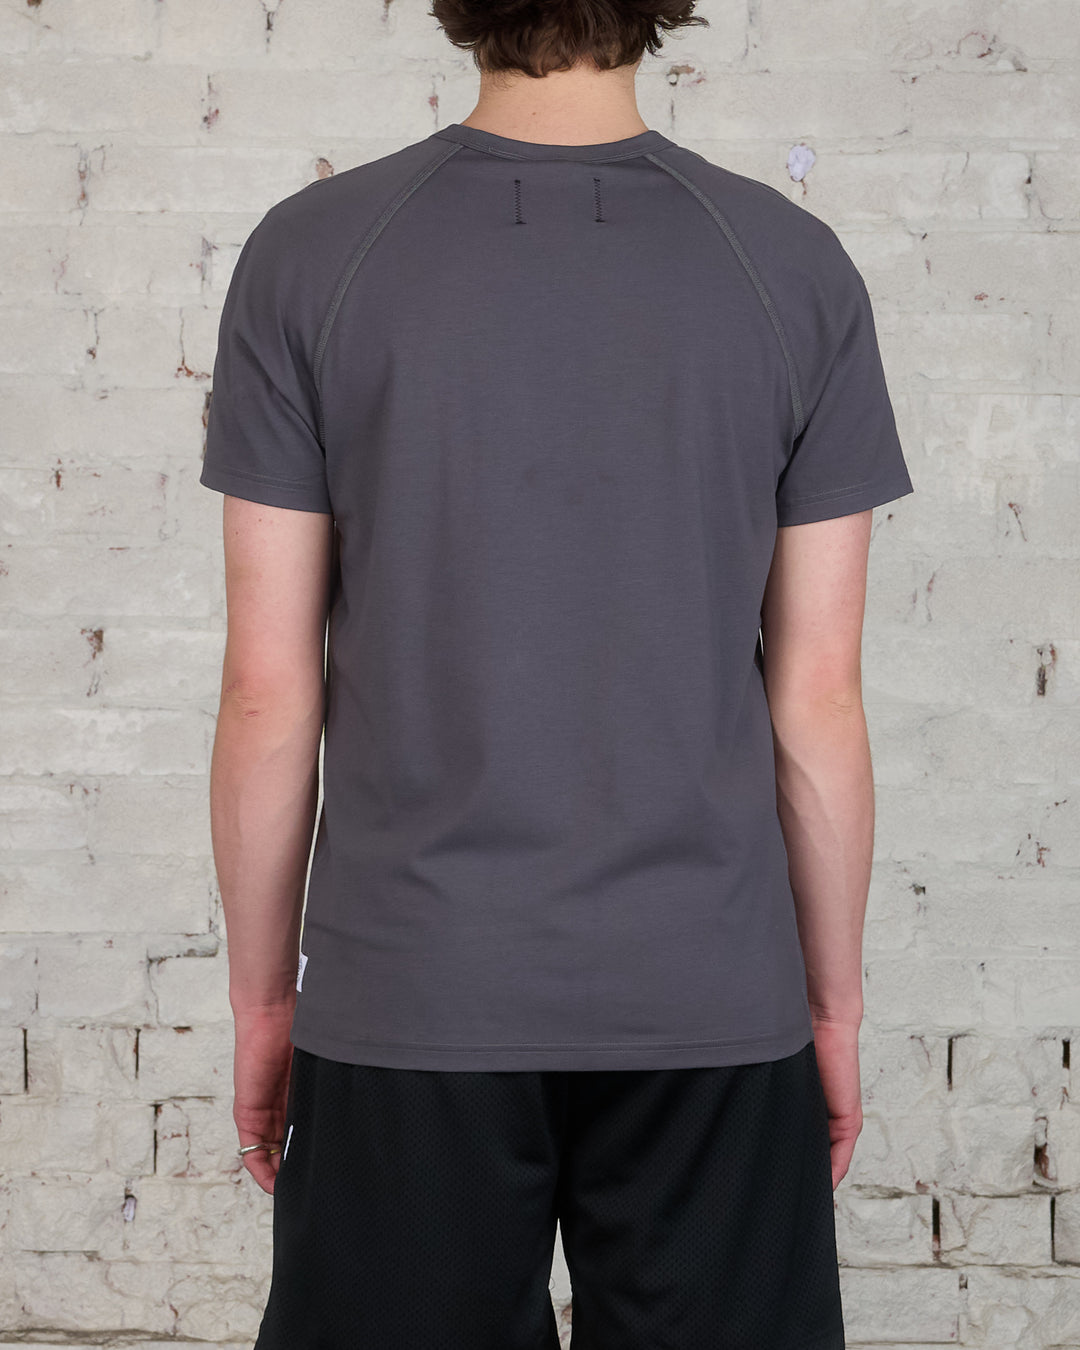 Reigning Champ Knit Copper Jersey T-Shirt Charcoal